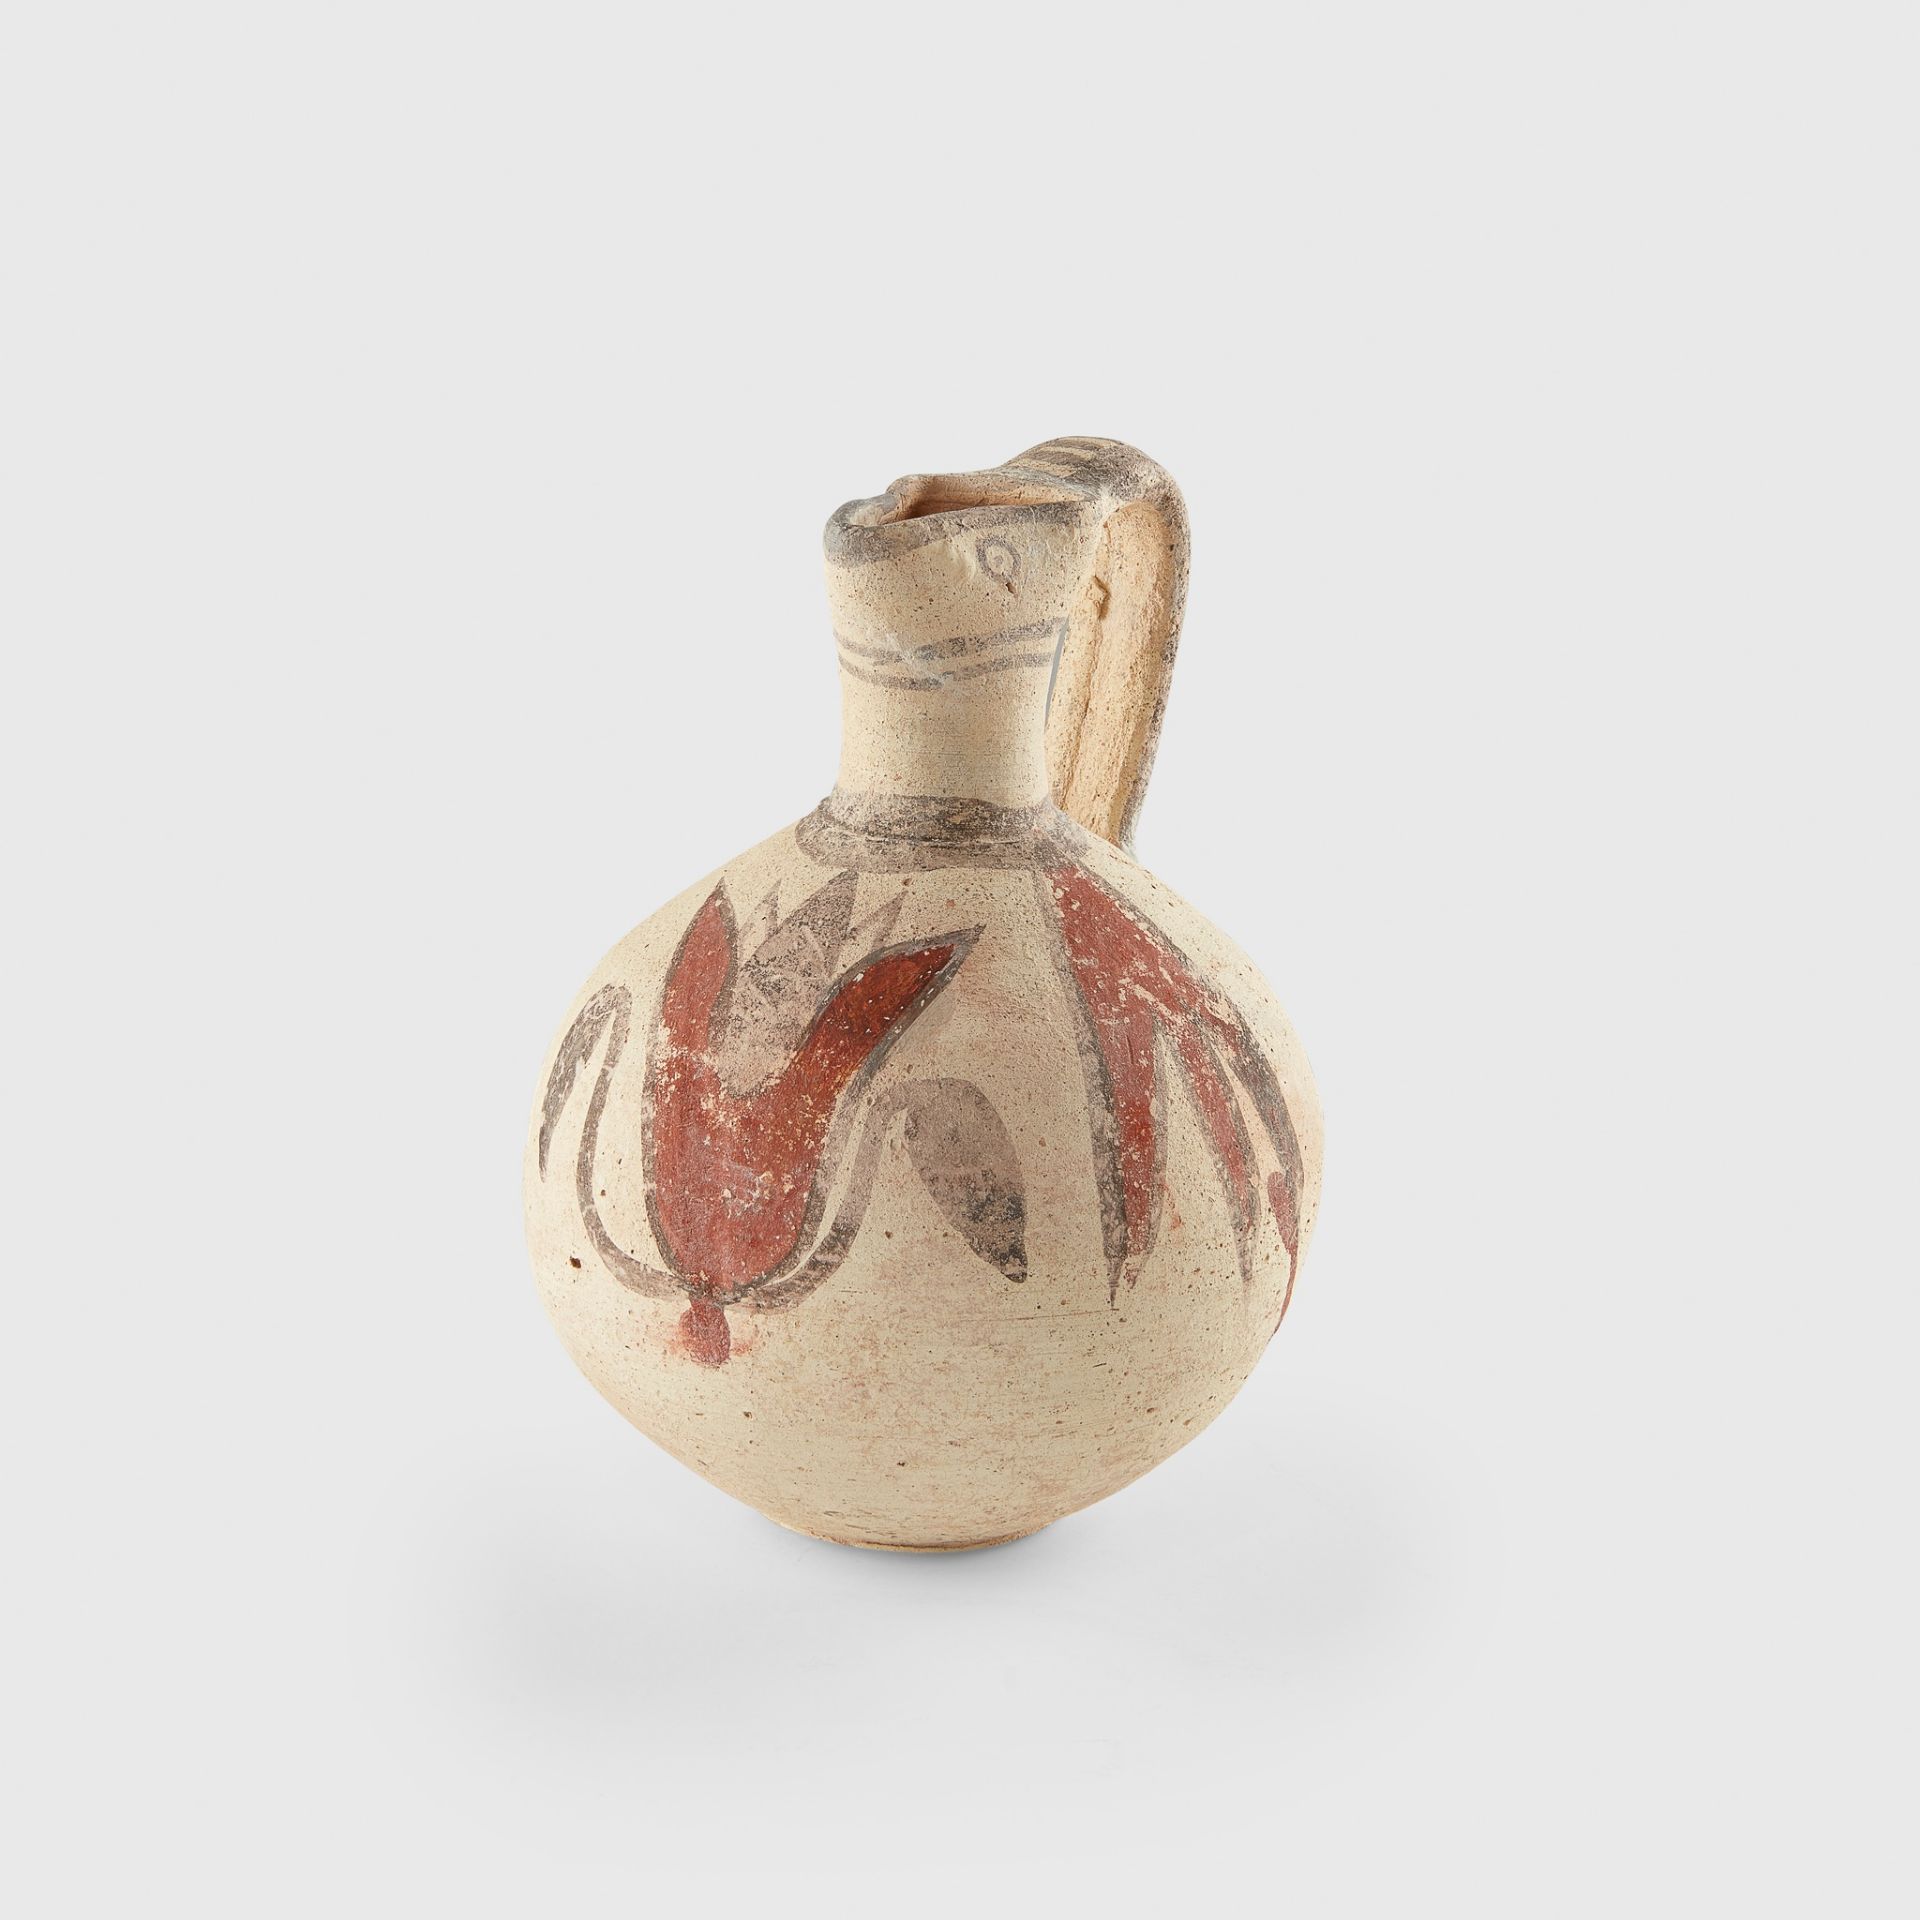 ANCIENT CYPRIOT BOTTLE CYPRUS, 600 - 450 B.C.